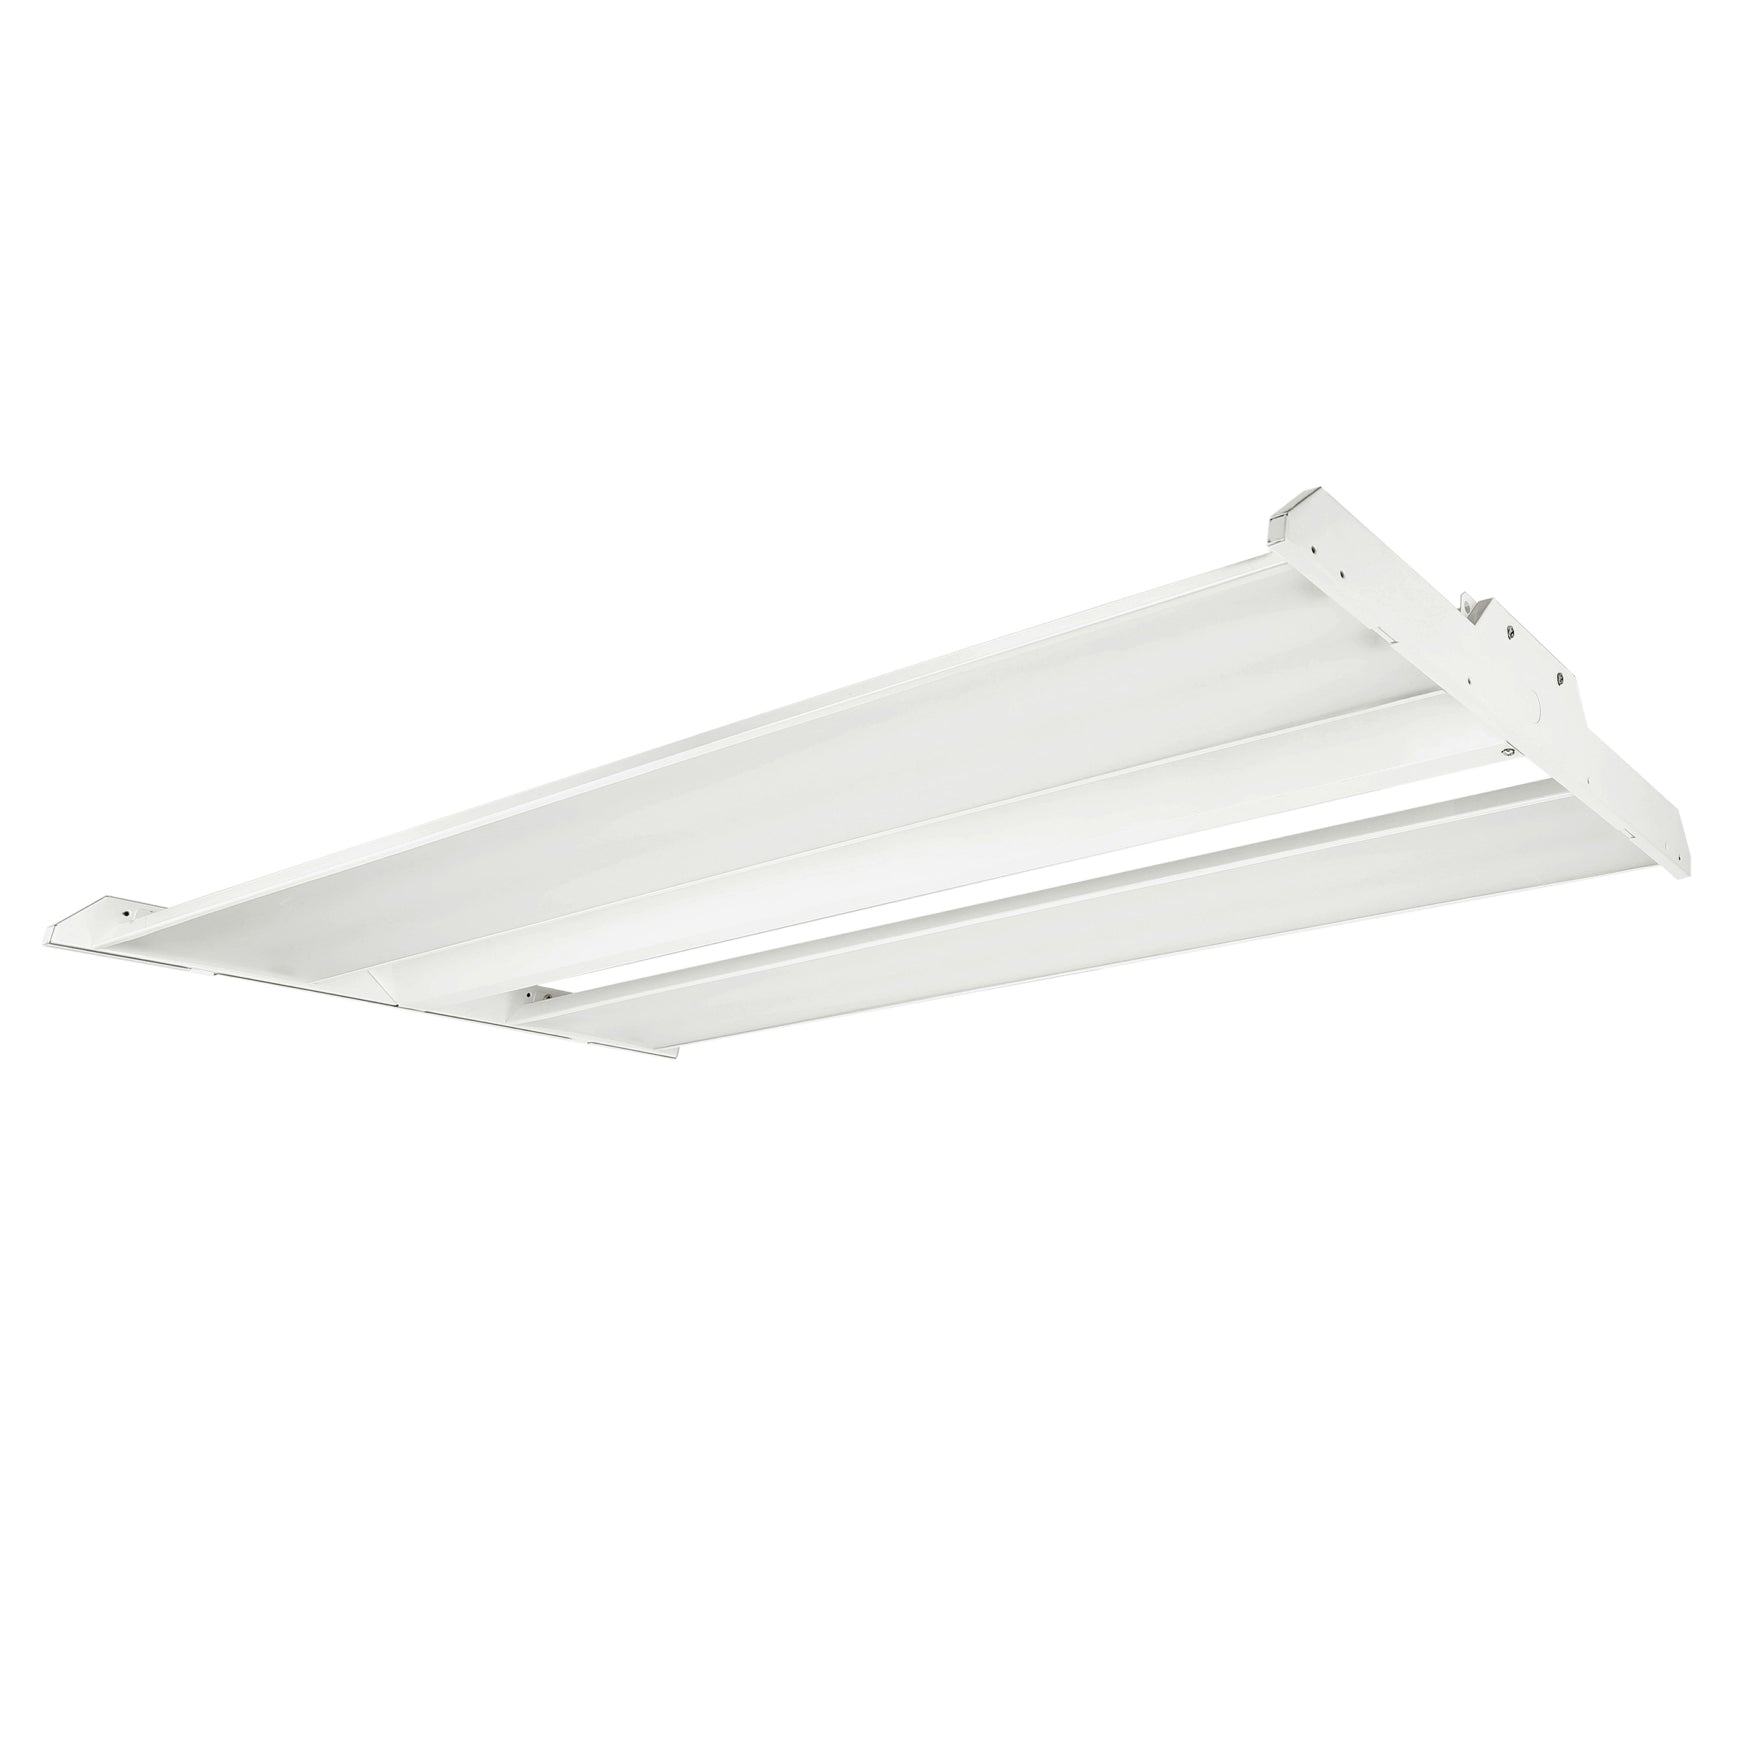  View details for 300-Watts LED Linear High Bay Clear Diffuser 120-277VAC 41,500 Lumens 300-Watts LED Linear High Bay Clear Diffuser 120-277VAC 41,500 Lumens